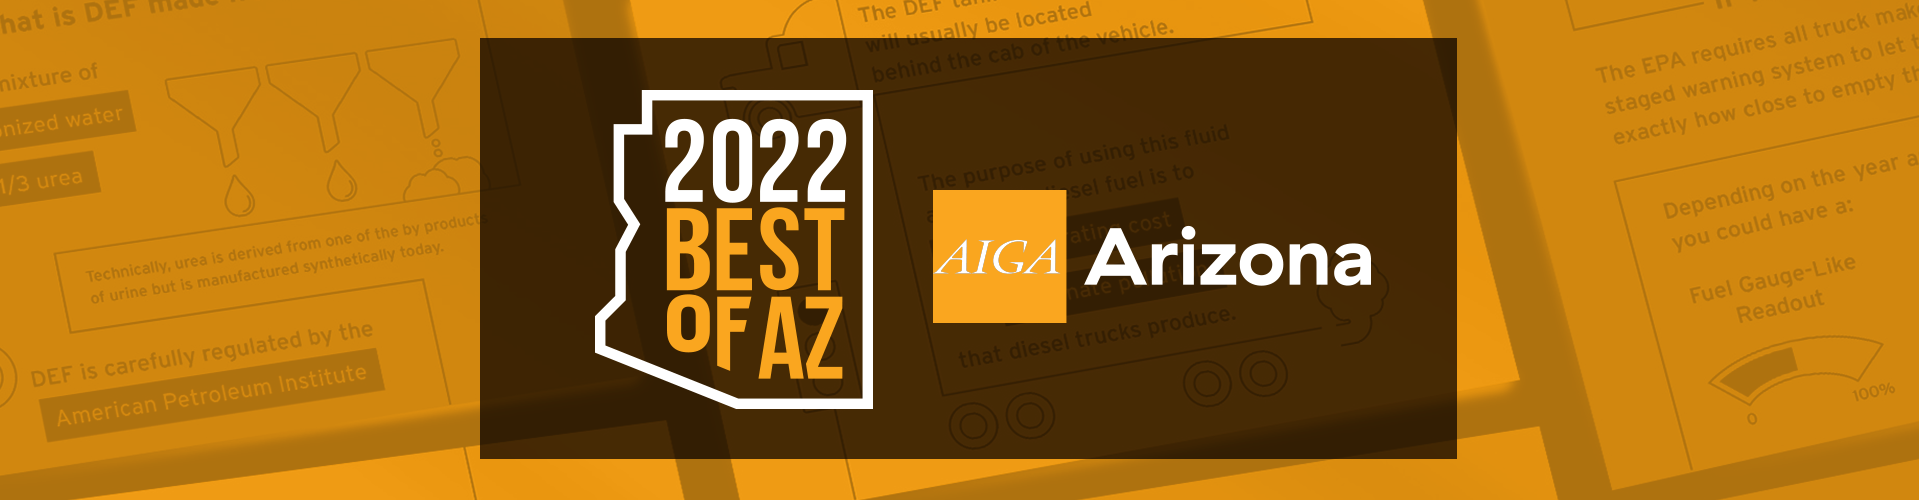 AIGA-AZ Best Of 2021 Gallery is now open for voting!